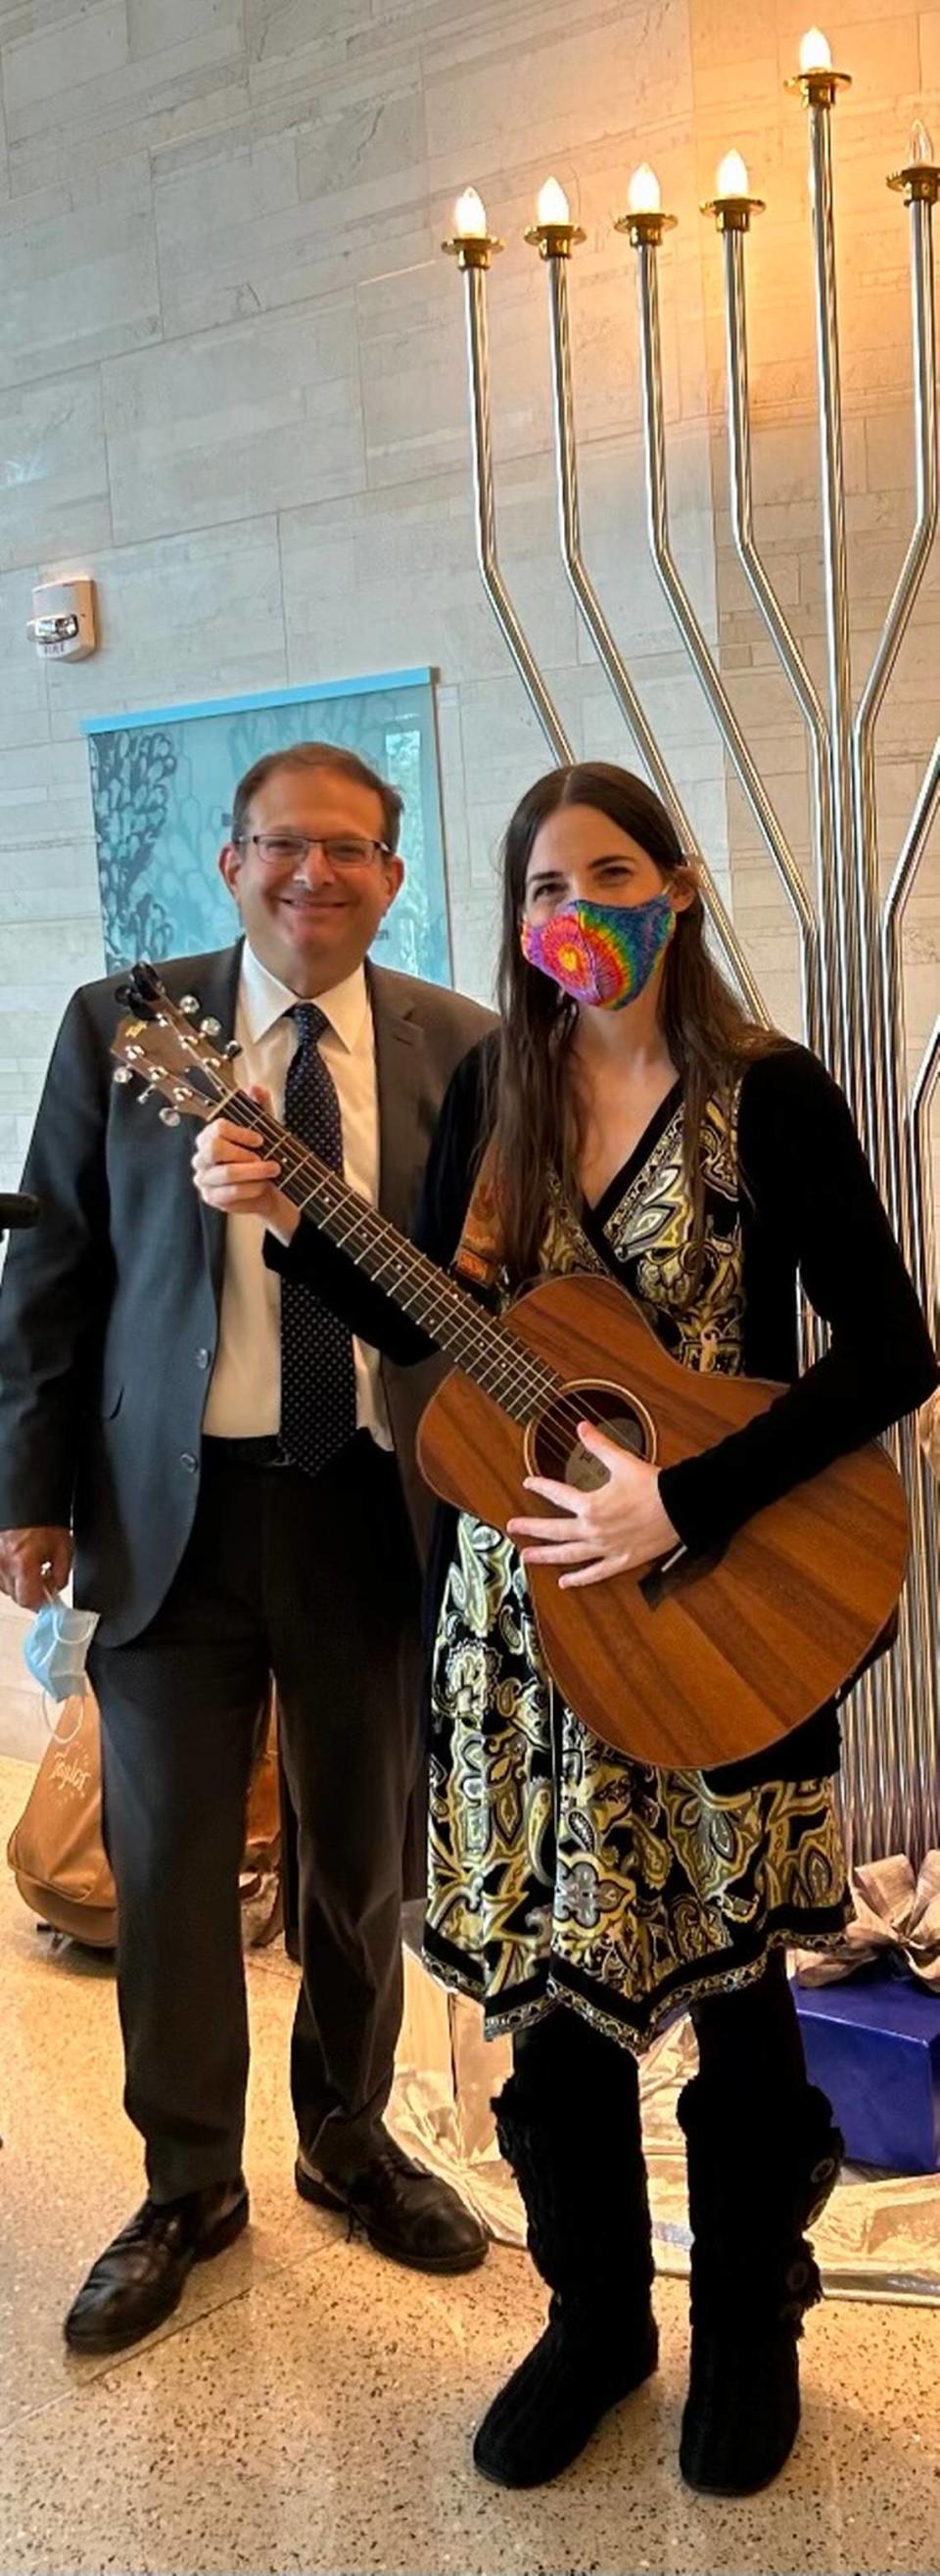 Rabbi Frederick Klein and cantor Laura Lenes led a Hanukkah program for patients at the Miami Cancer Institute. The rabbi and volunteers lit candles, sang songs and distributed Hanukkah donuts to those receiving treatment. Klein leads a Greater Miami Jewish Federation program called Refuat Ha-Nefesh Fellows, which provides support to seniors and the ill.